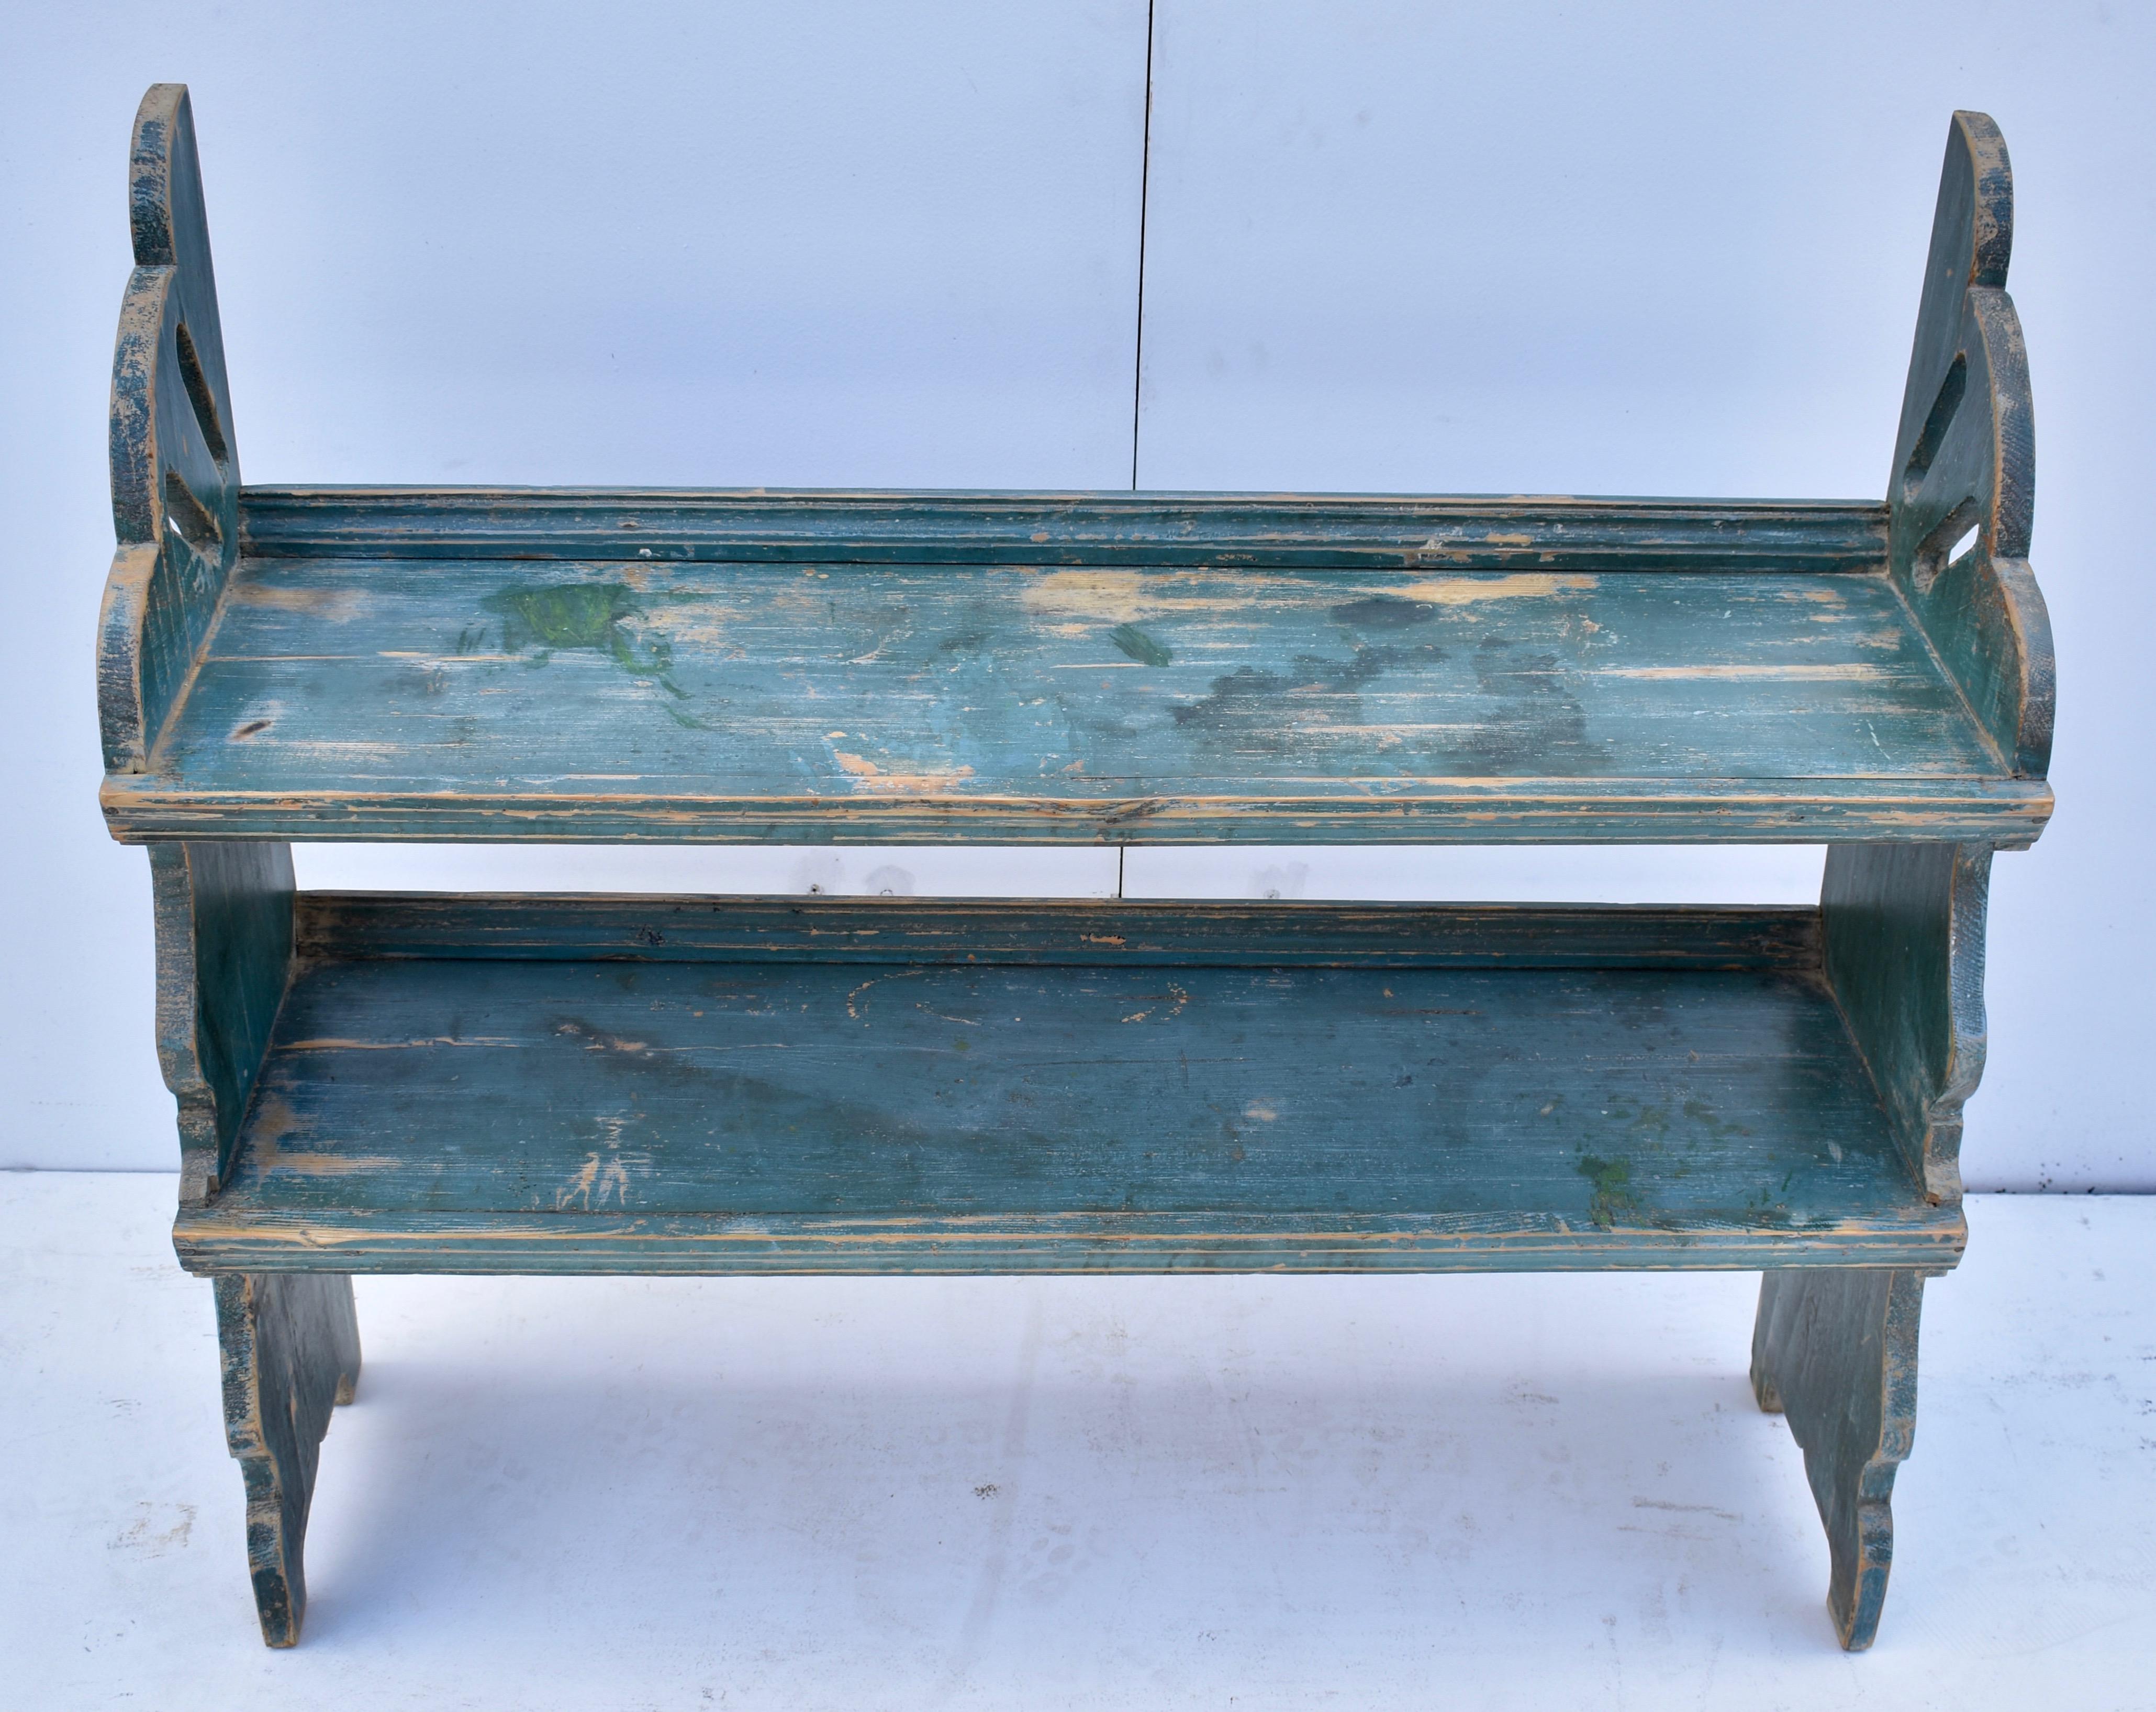 This interesting and attractive water bench has scalloped sides with fretwork perforations at the top. The two shelves are tenoned through the sides for strength and stability and a lip at the back prevents vessels from falling off. Built to house